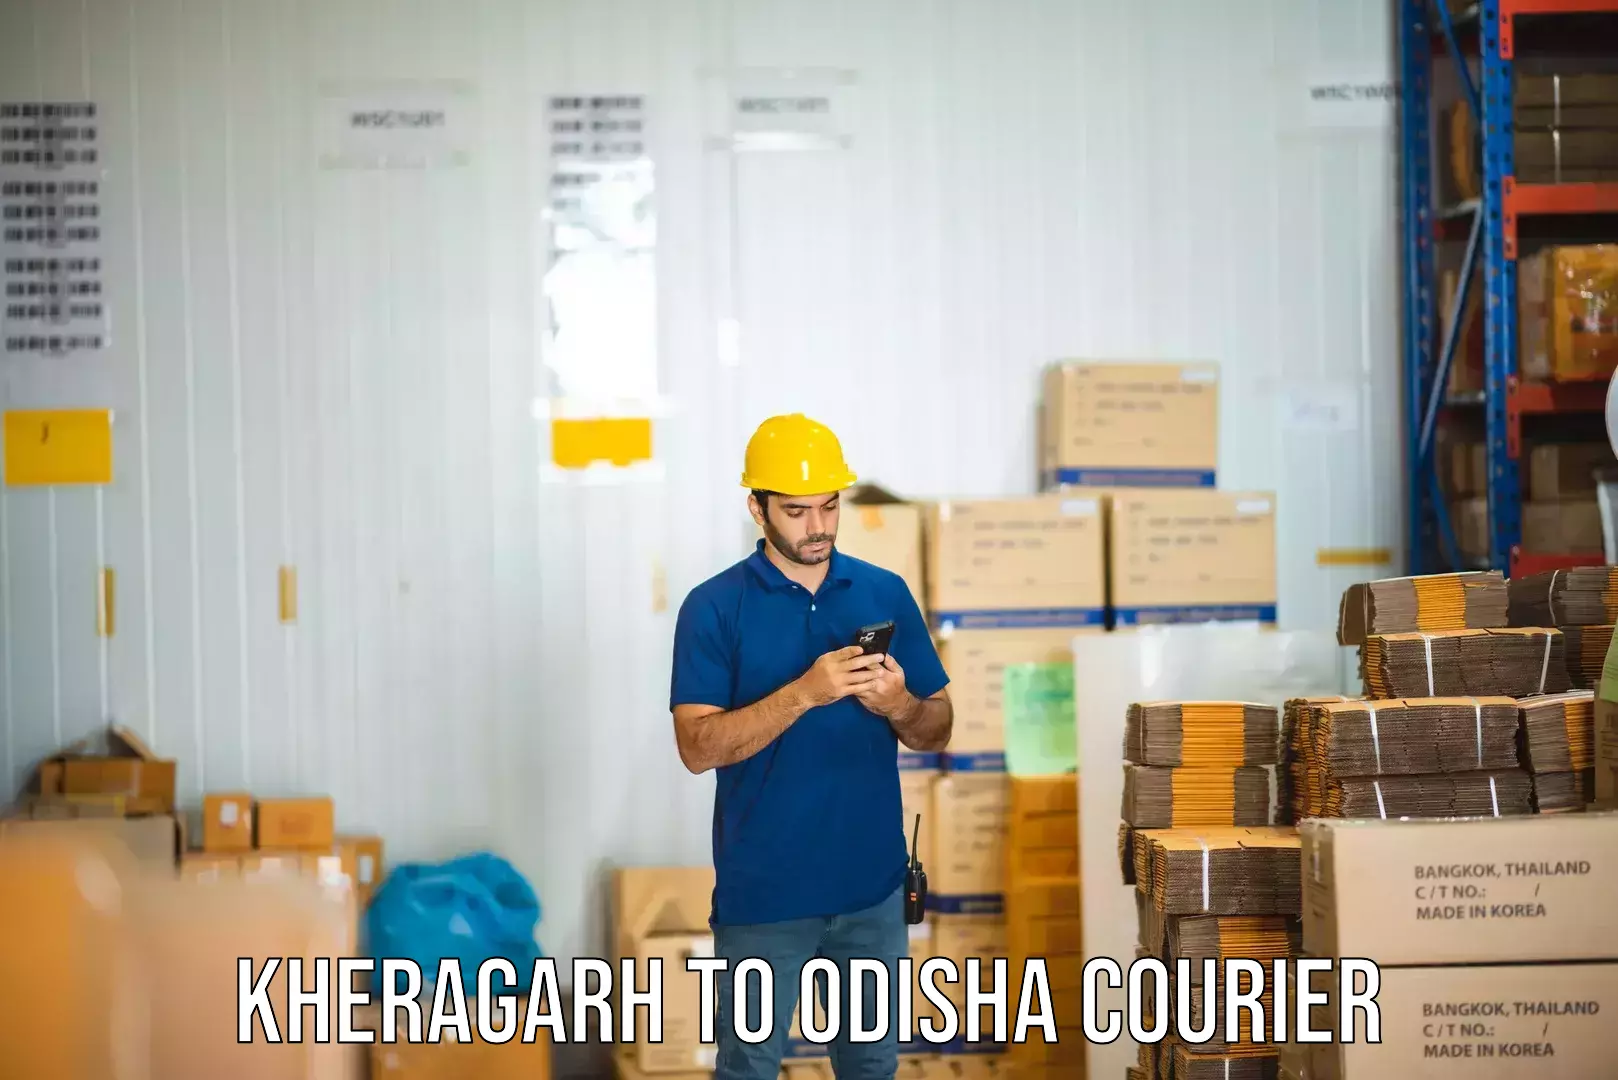 Parcel handling and care Kheragarh to Mohana